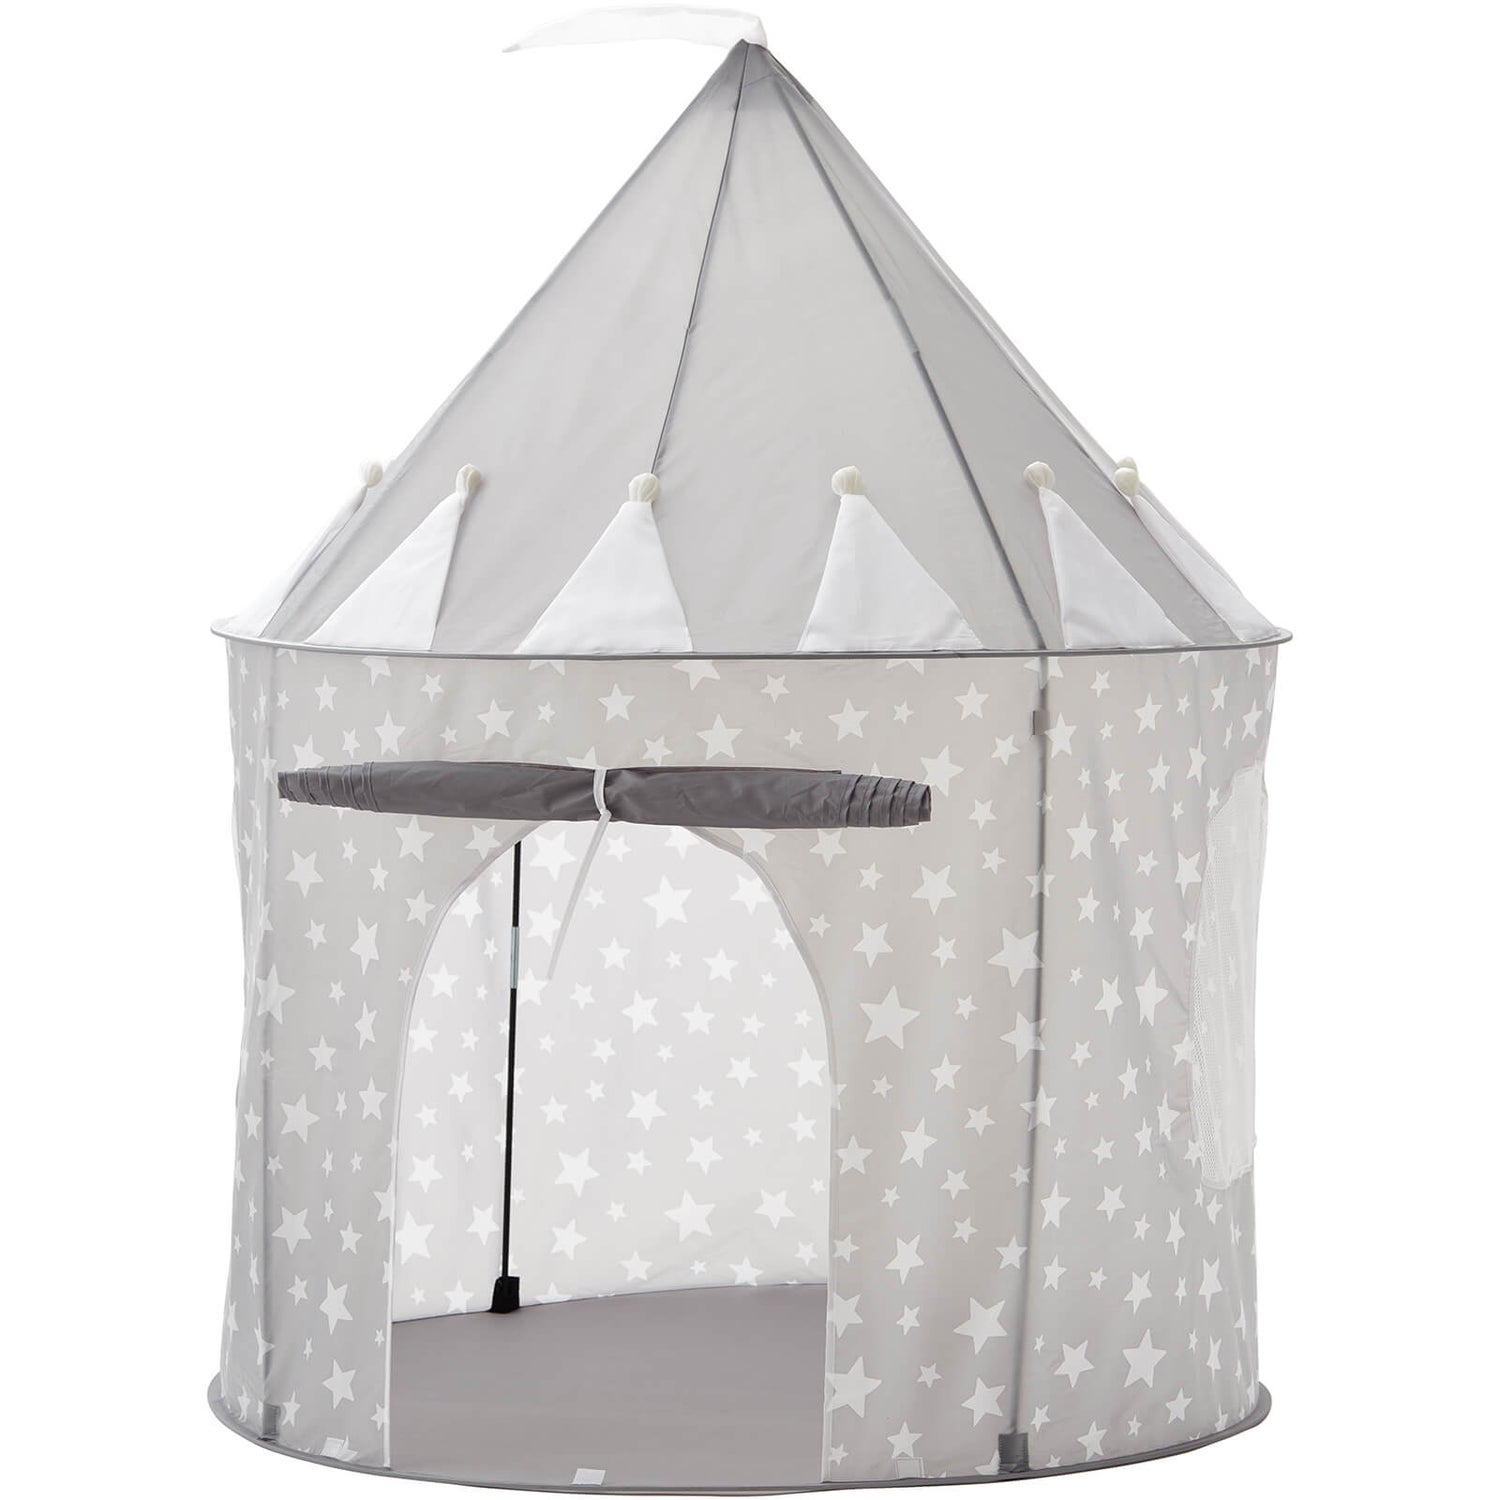 Kids Concept Star Play Tent - Grey